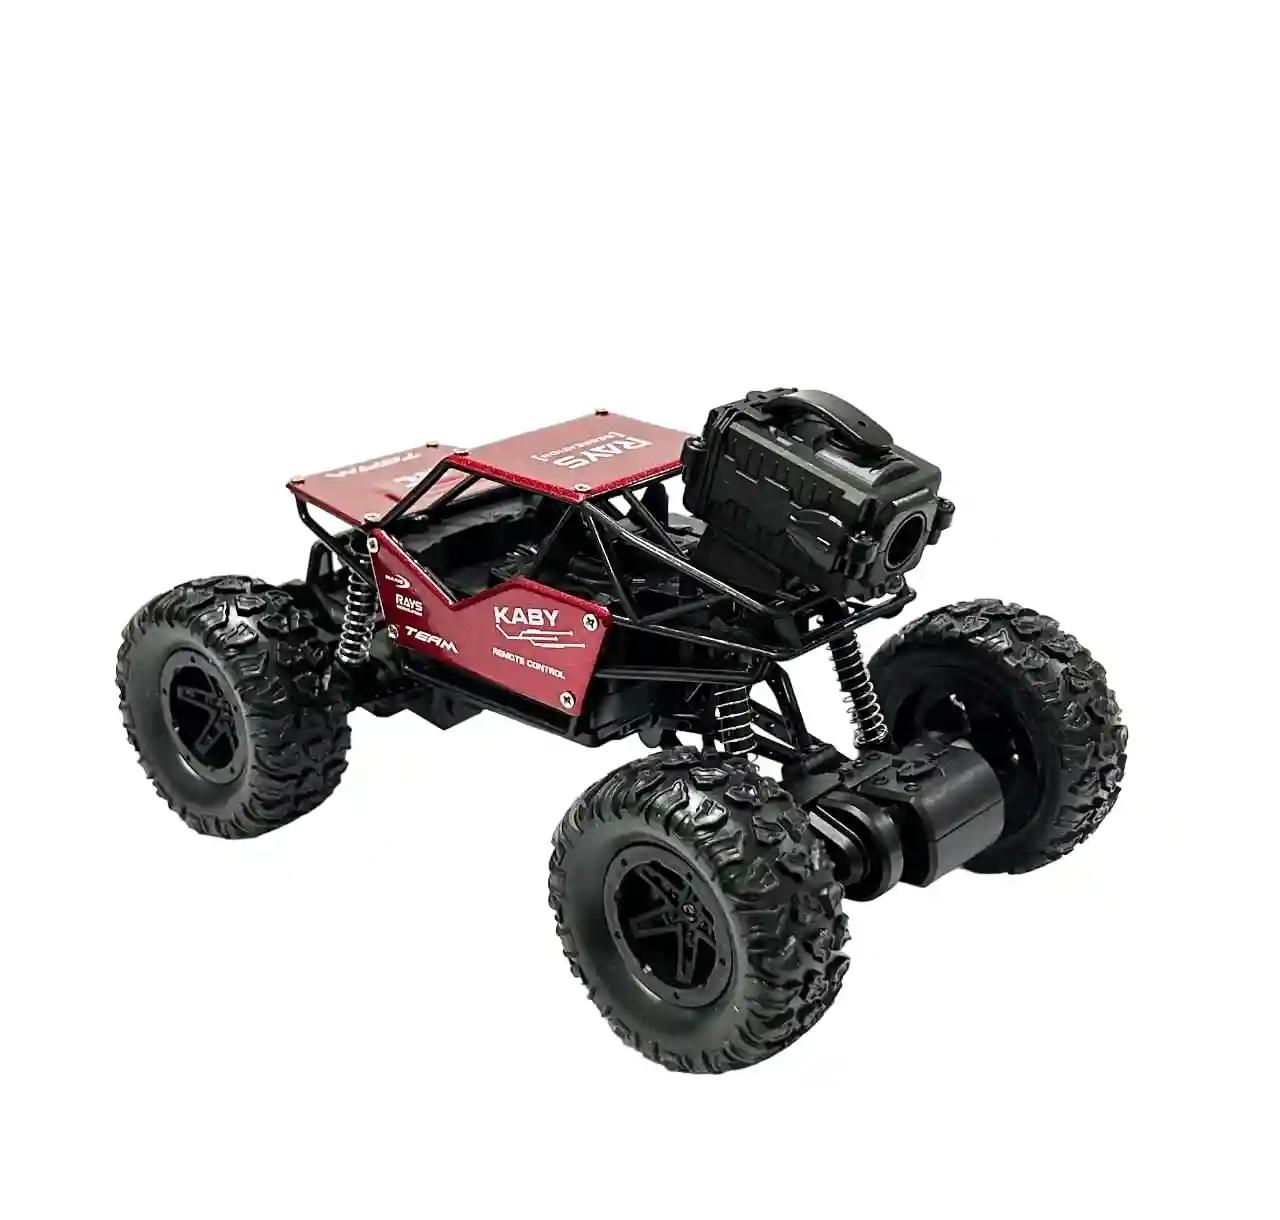 PAPASpace Remote Control Rock Crawler High Speed Monster Truck Car RC Off-Road Drift Booster Spray Rechargeable Toy for Kids Boys (Multicolor)